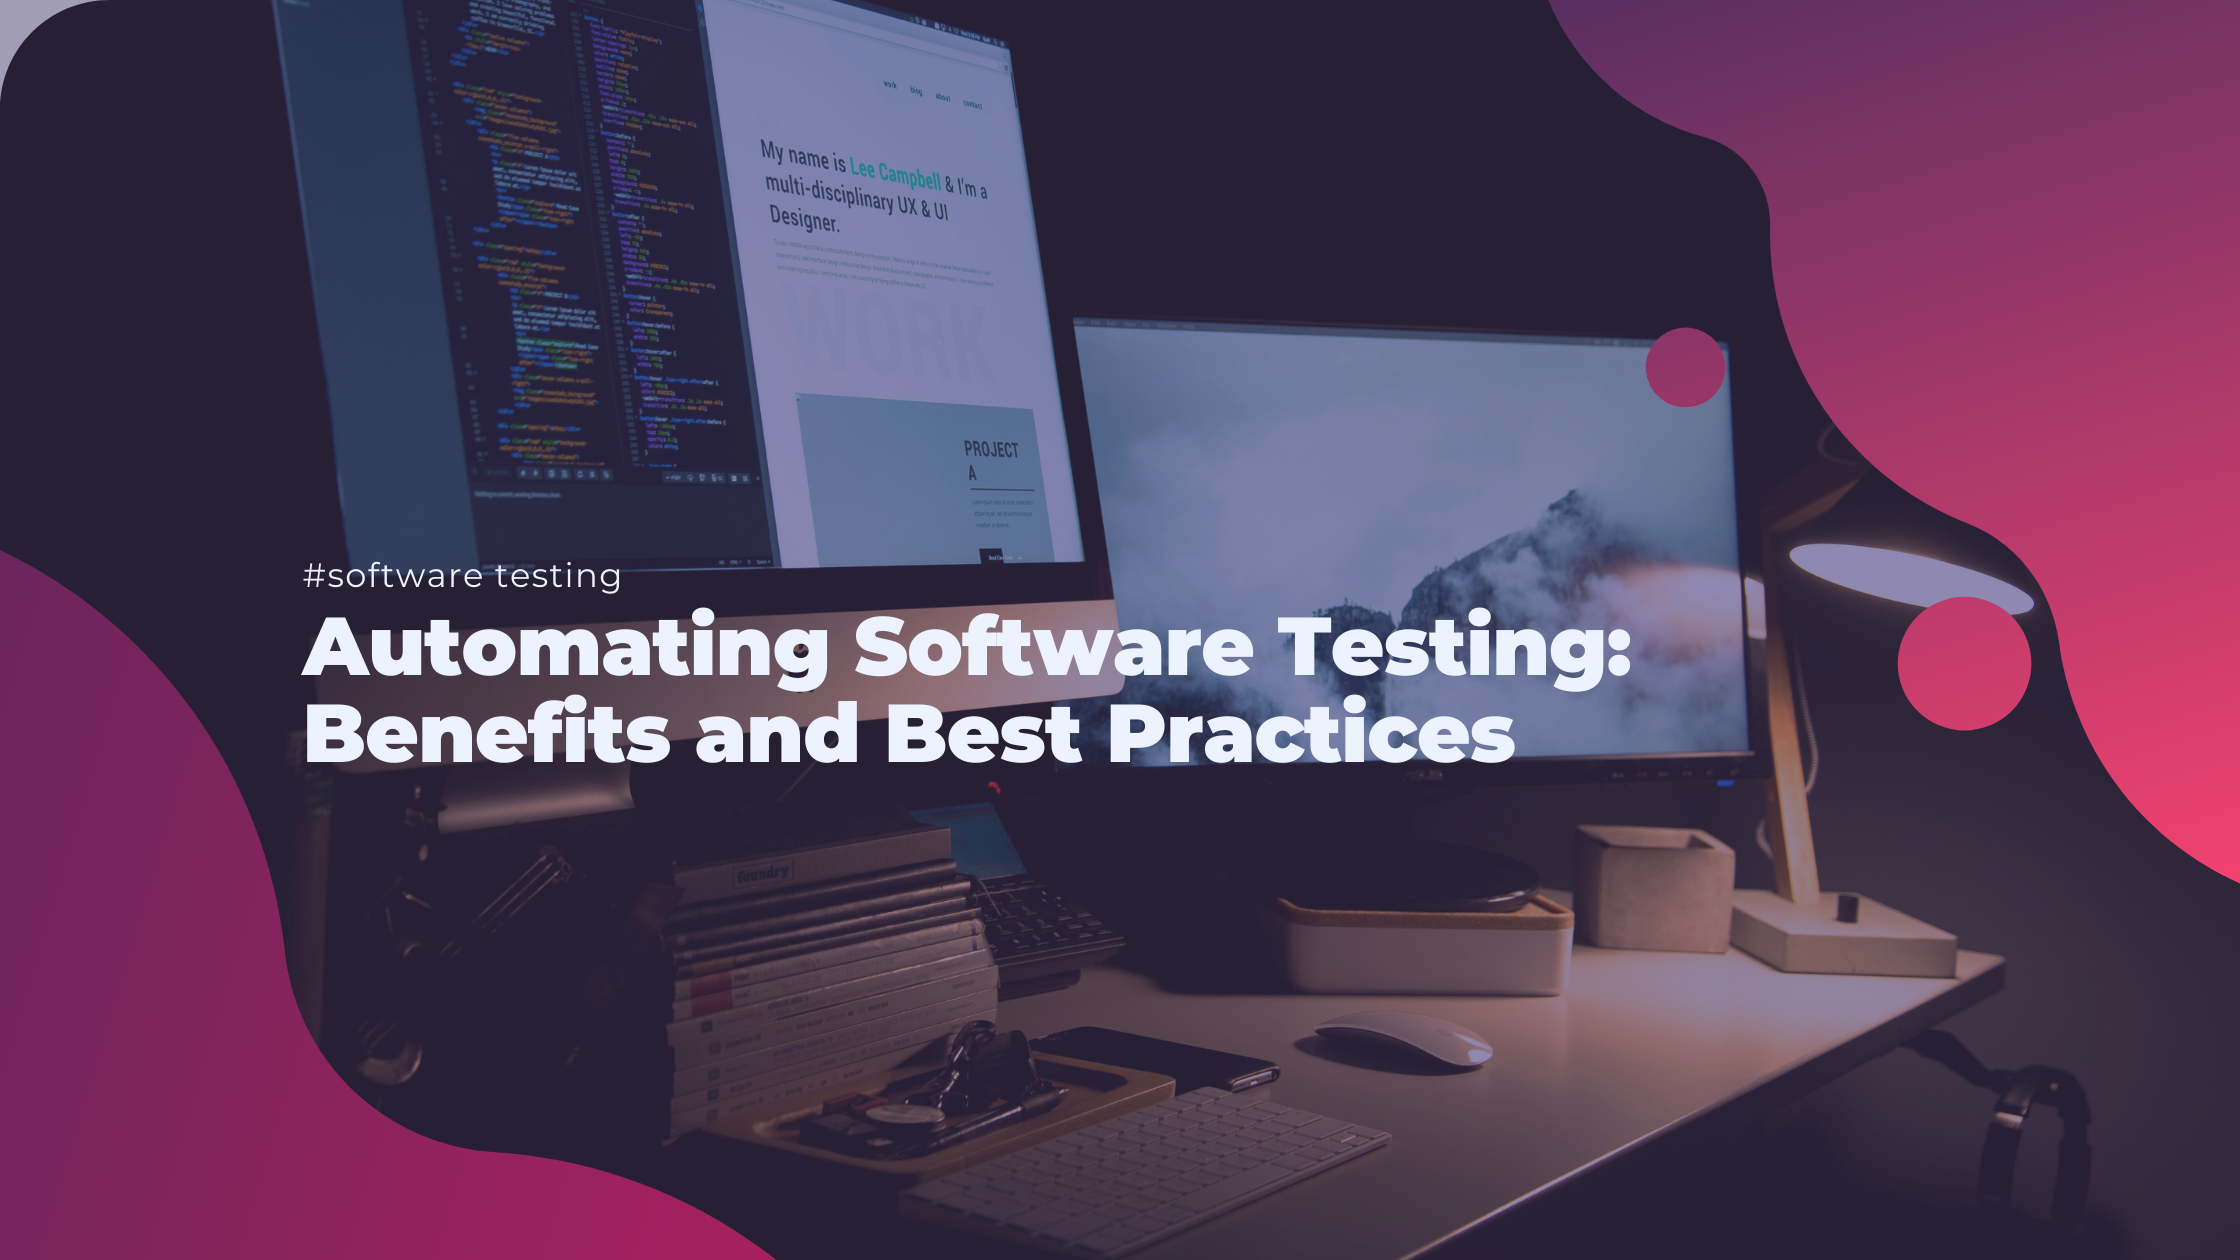 Automating Software Testing: Benefits and Best Practices